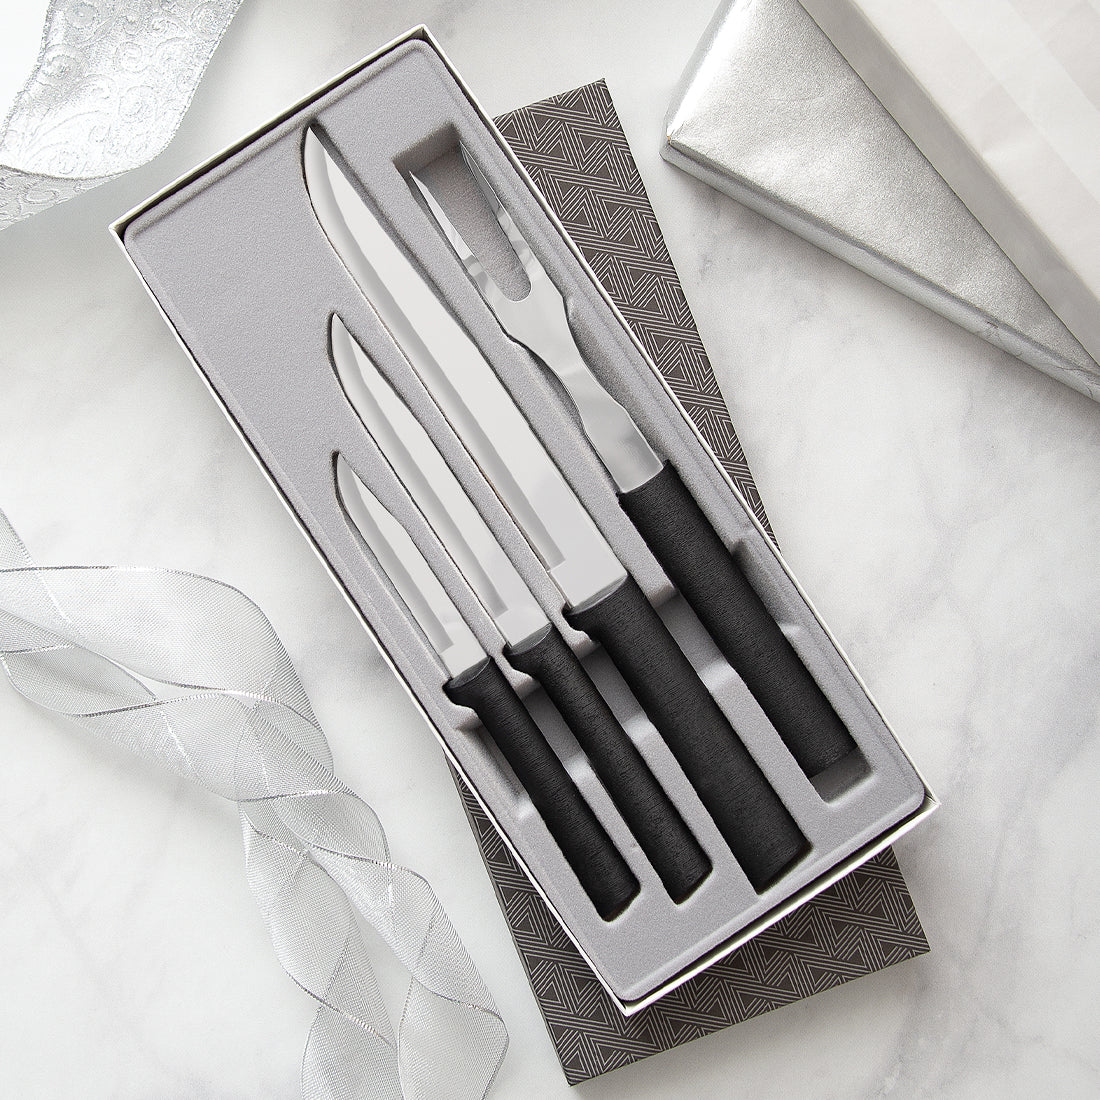 Prepare Then Carve Gift Set (three knives and a carving fork) with silver handles in a gift box